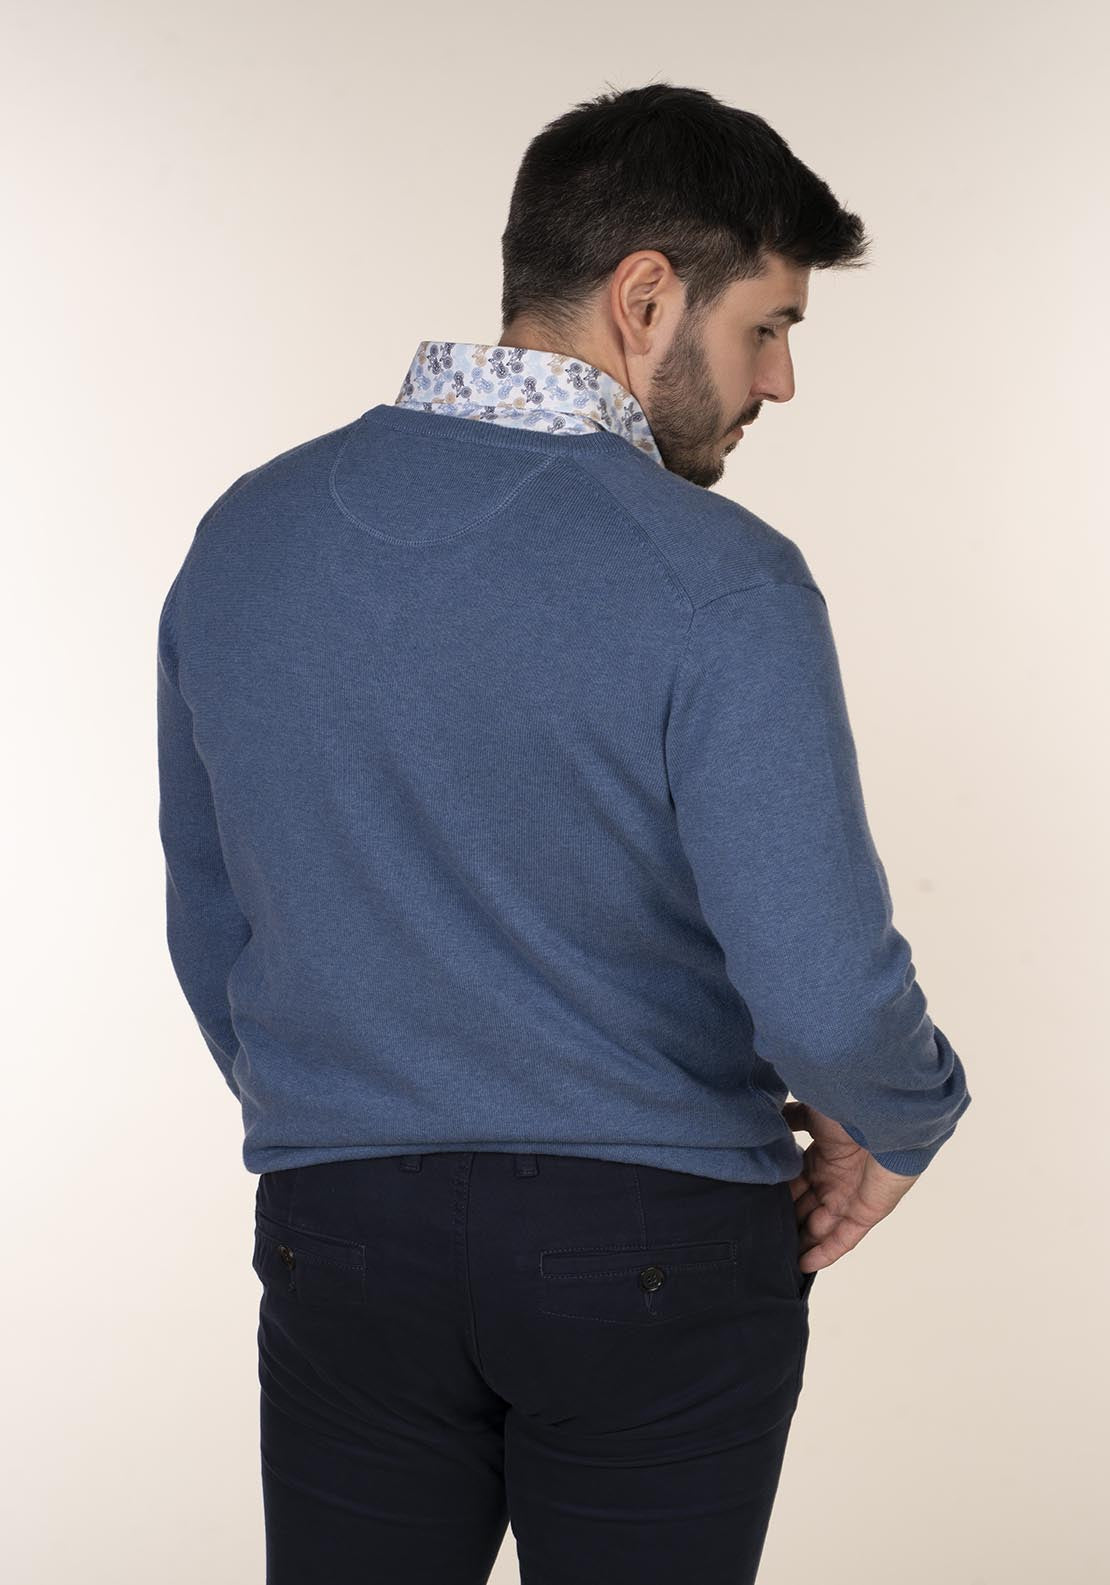 Yeats Plain Cotton V Neck Sweaters - Blue 5 Shaws Department Stores